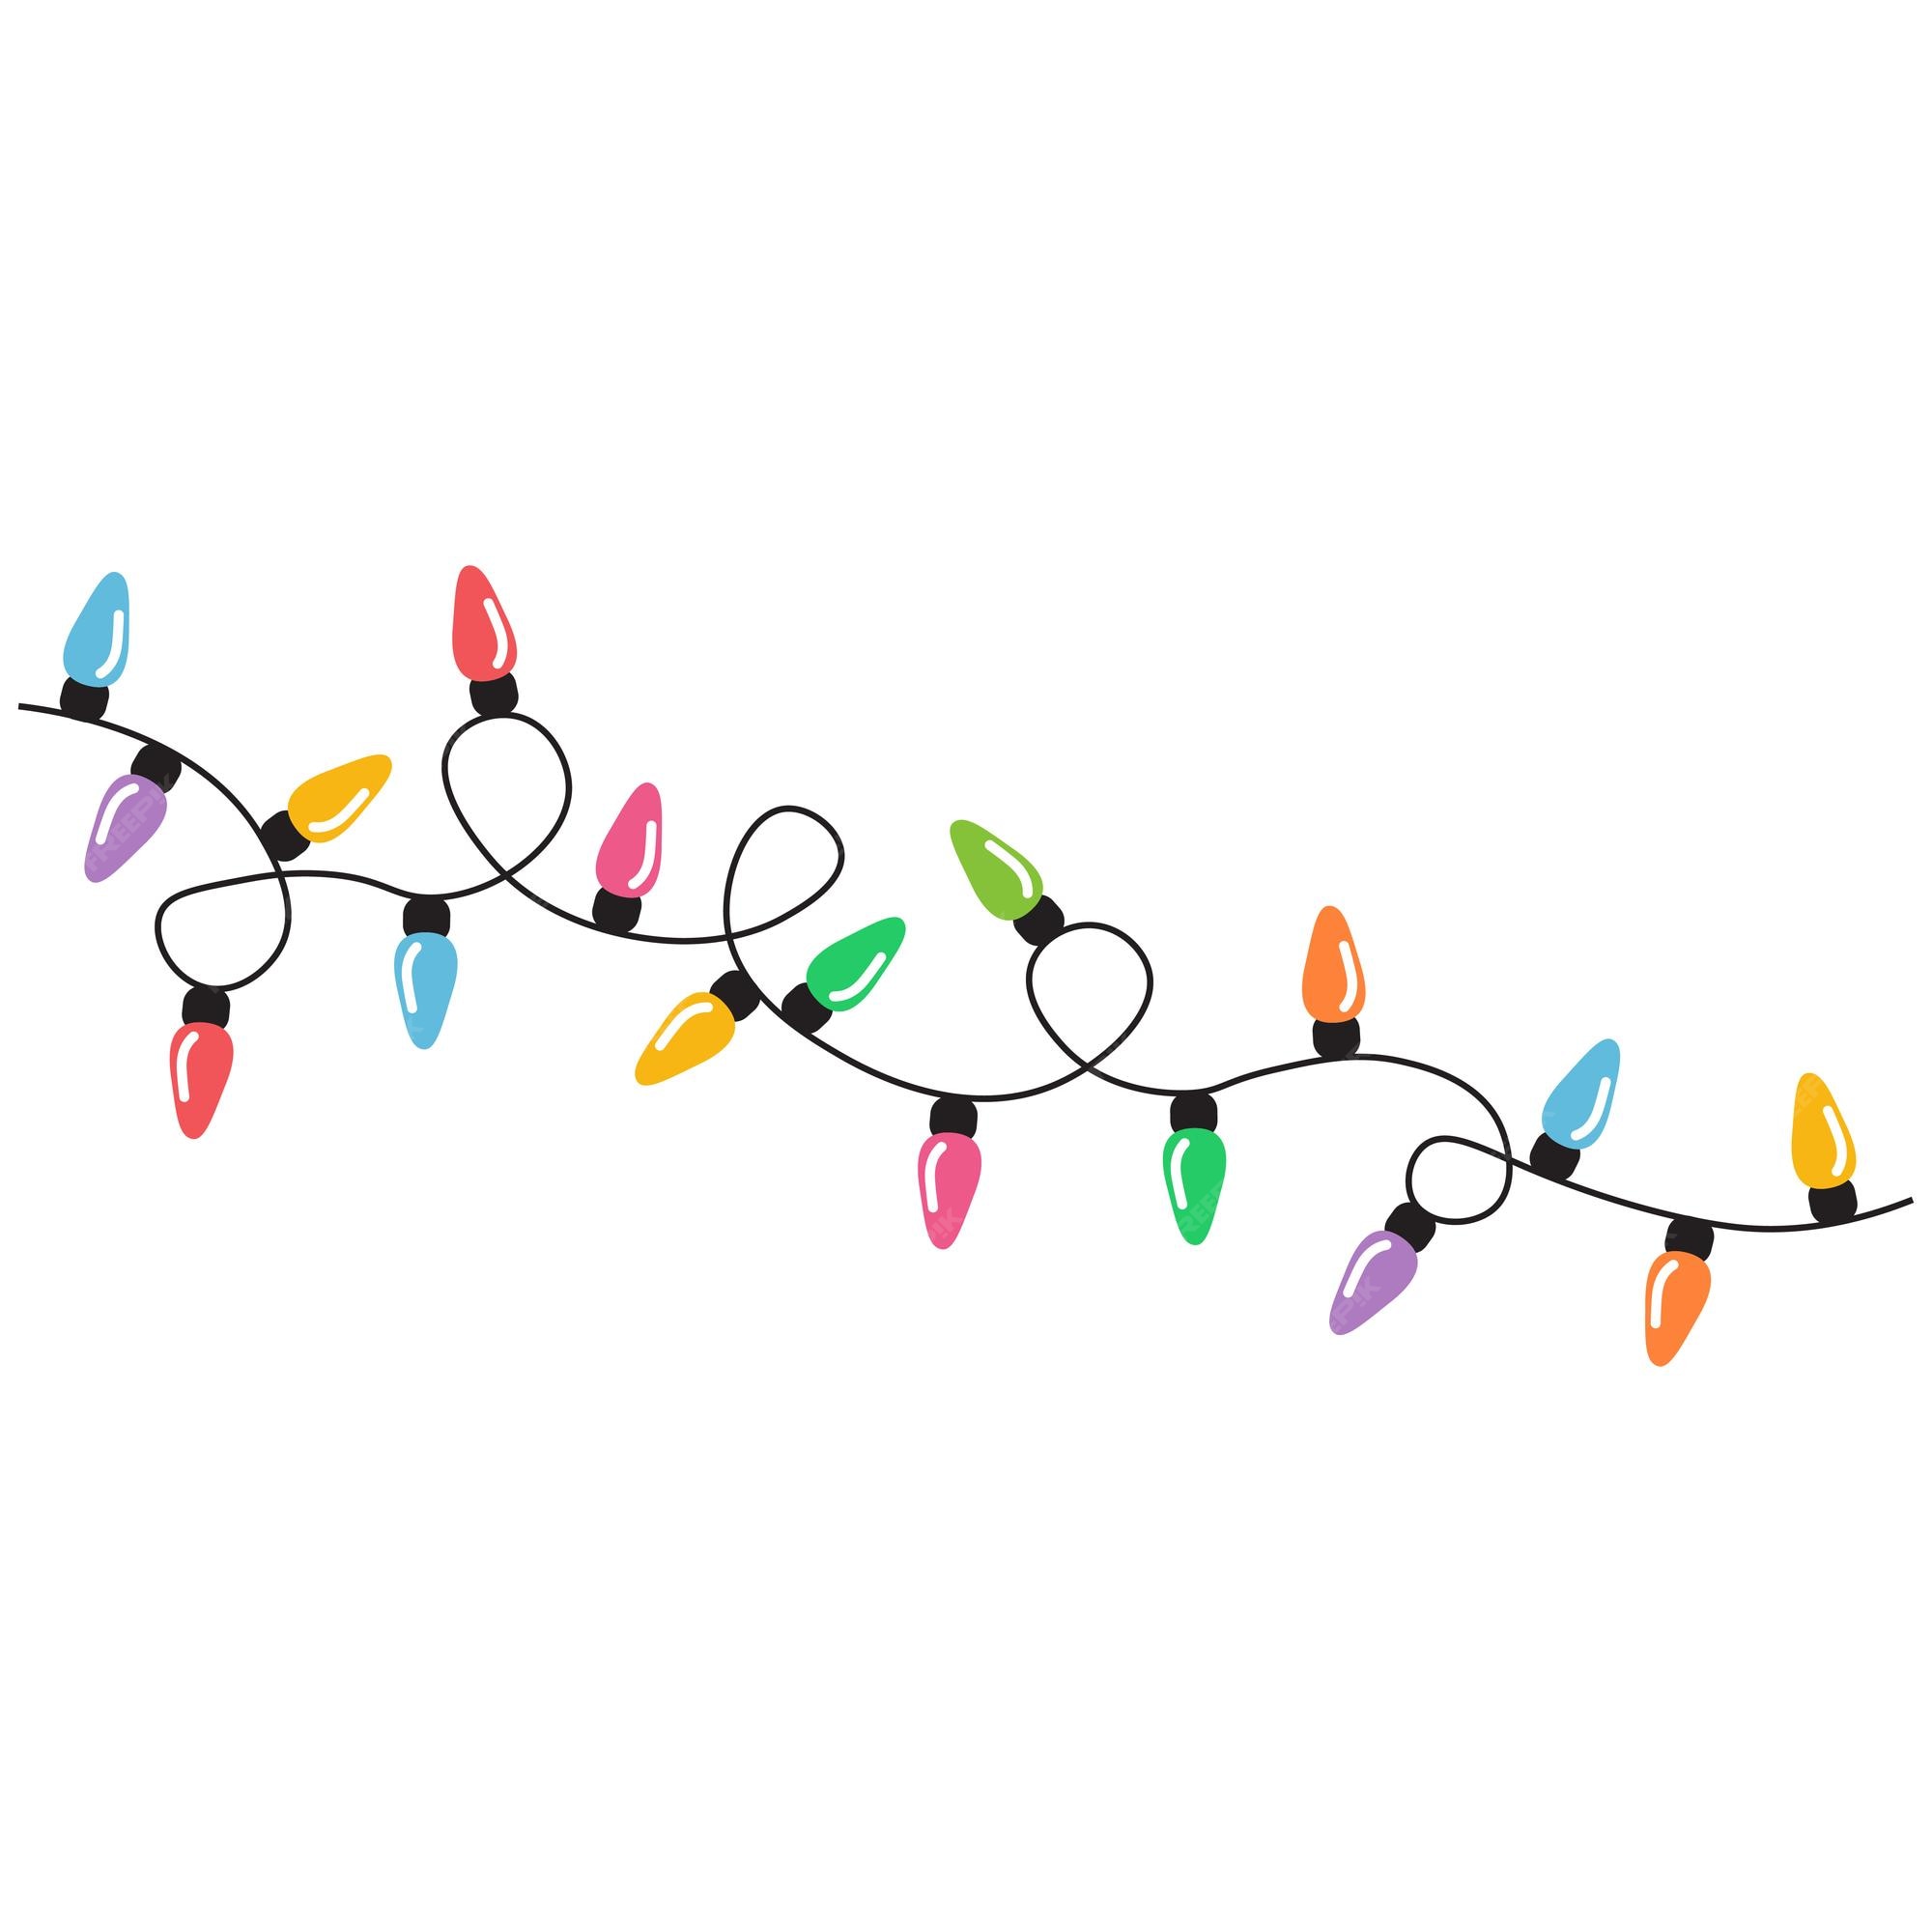 Stunning 93 Background Christmas lights Perfect fit for any device during the Christmas season.